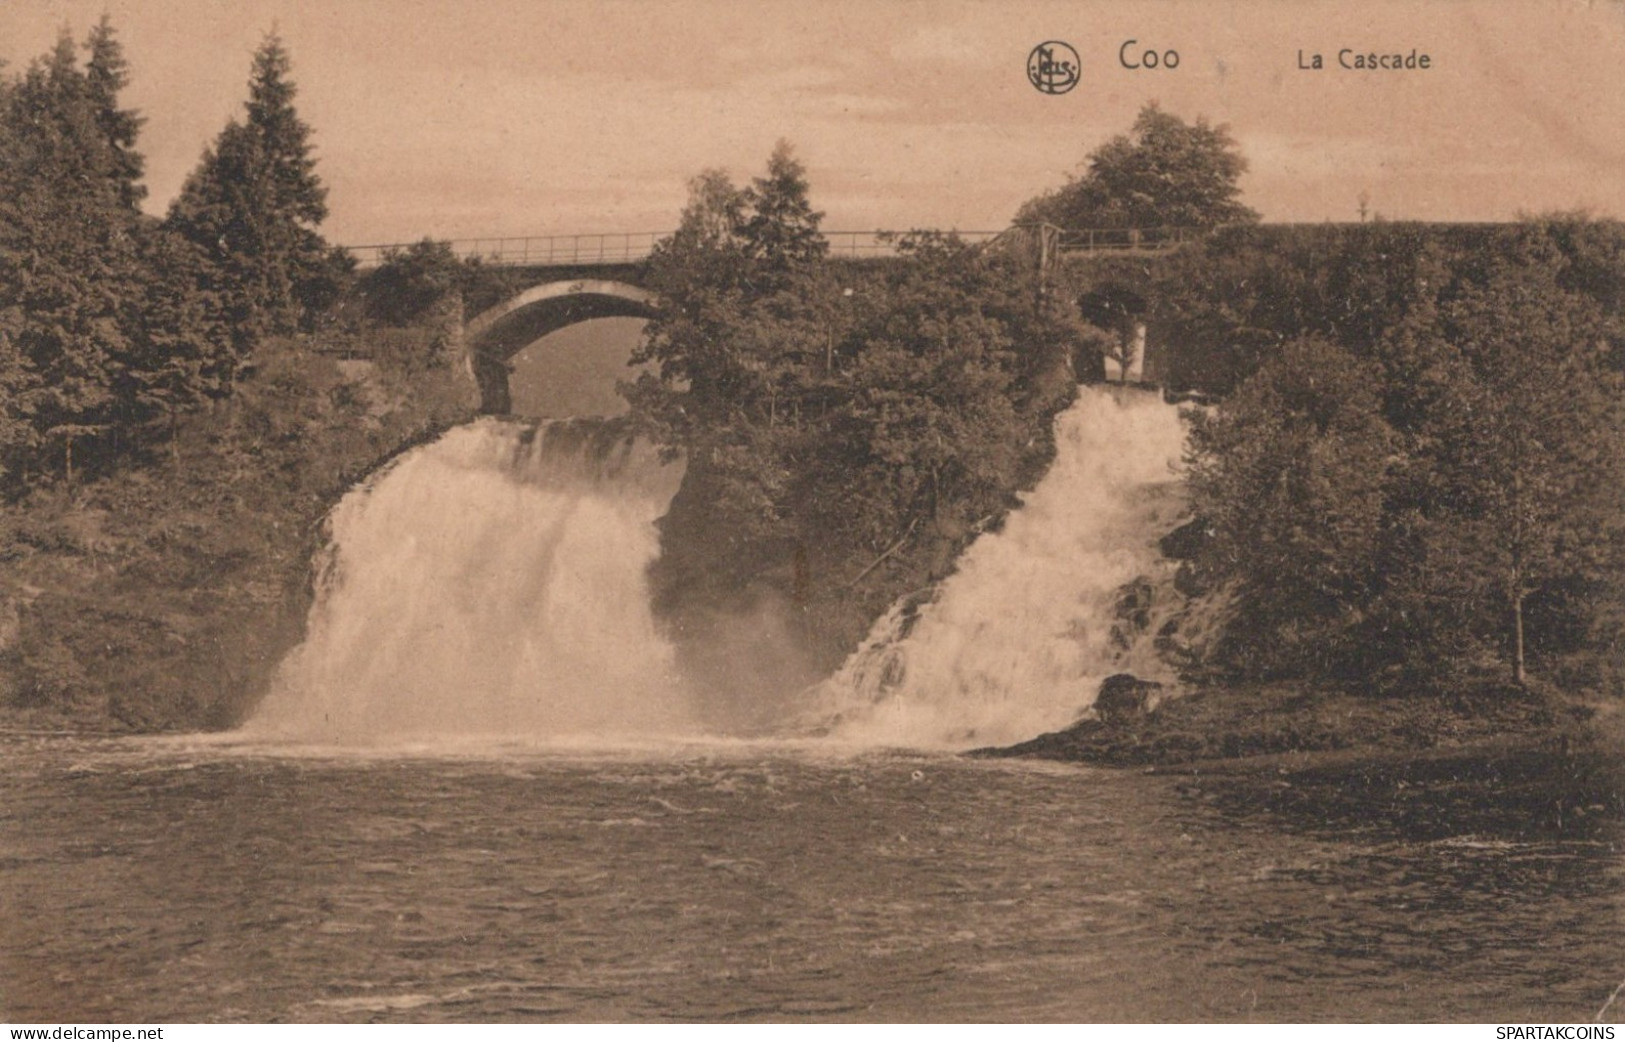 BELGIUM COO WATERFALL Province Of Liège Postcard CPA Unposted #PAD128.GB - Stavelot